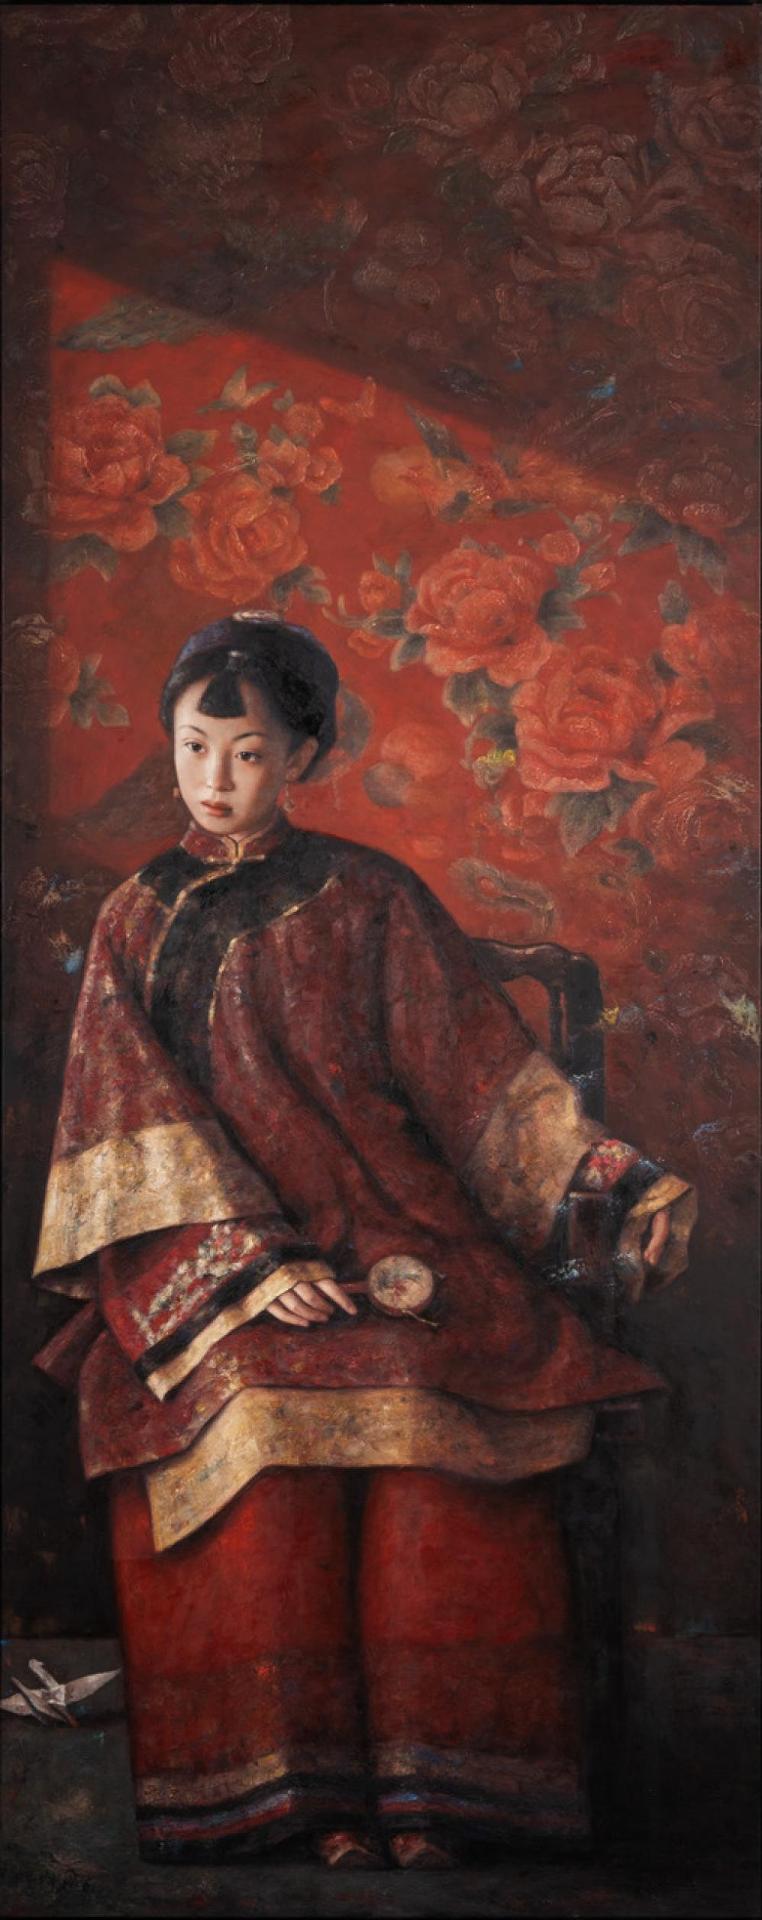 Dai Pingjun (1976) - Untitled - Seated Figure in a Red Robe